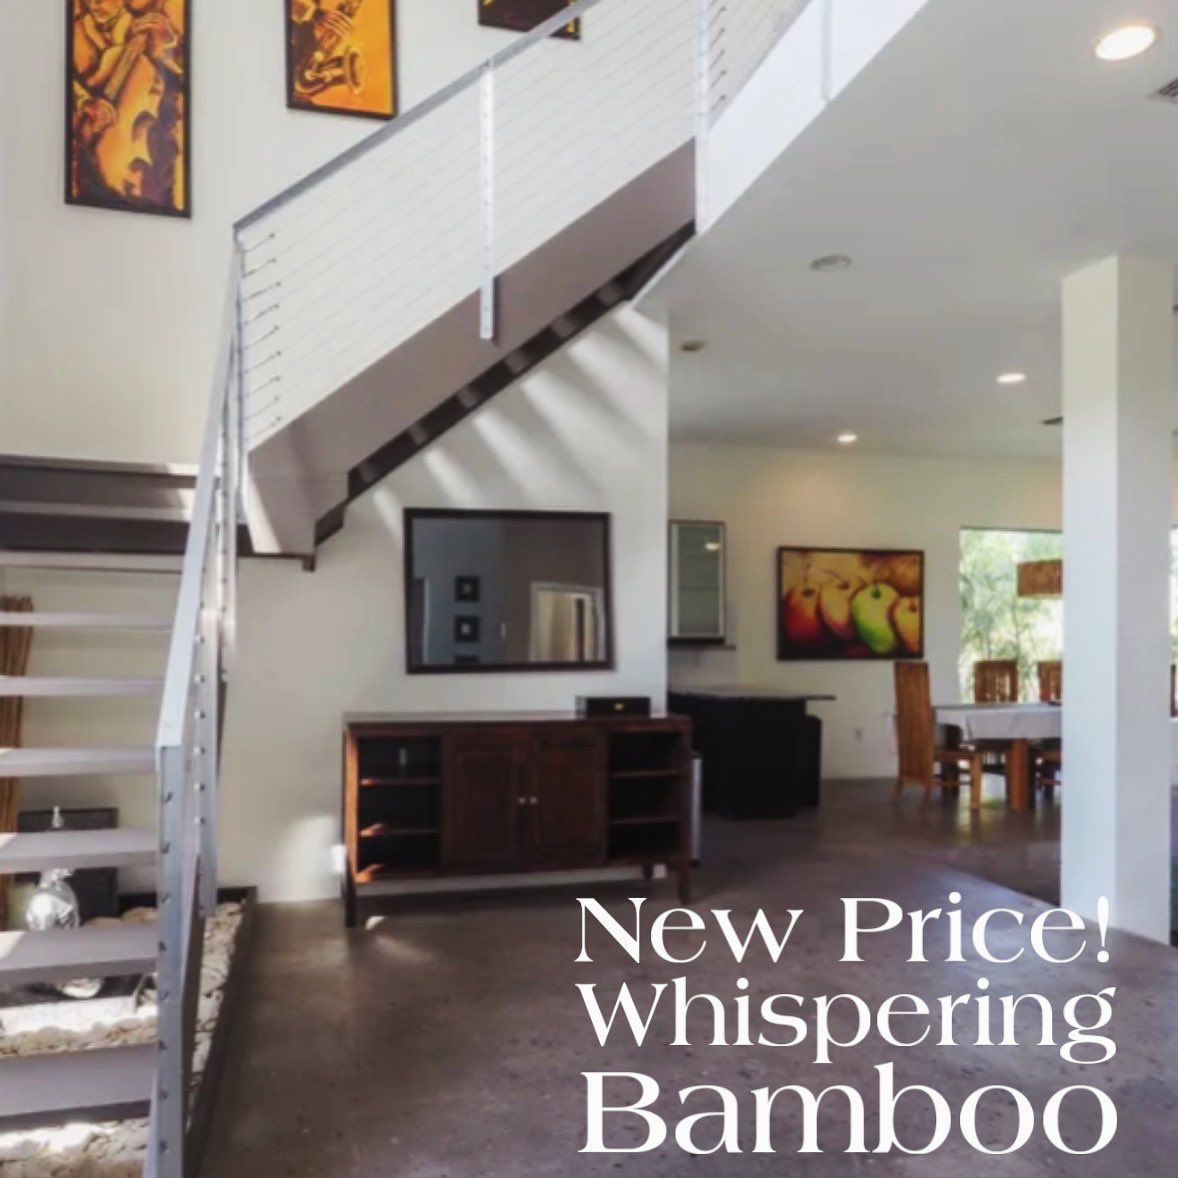 New Price
Whispering Bamboo

The open staircase leads to 3 spacious bedrooms on the 2nd level

Member of CIREBA 
MLS # 415605

#Wednesday #Whispering #Bamboo #Zen #Scuba
#CaymanRealEstate #caymansothebysrealty #caymanislandsrealestate